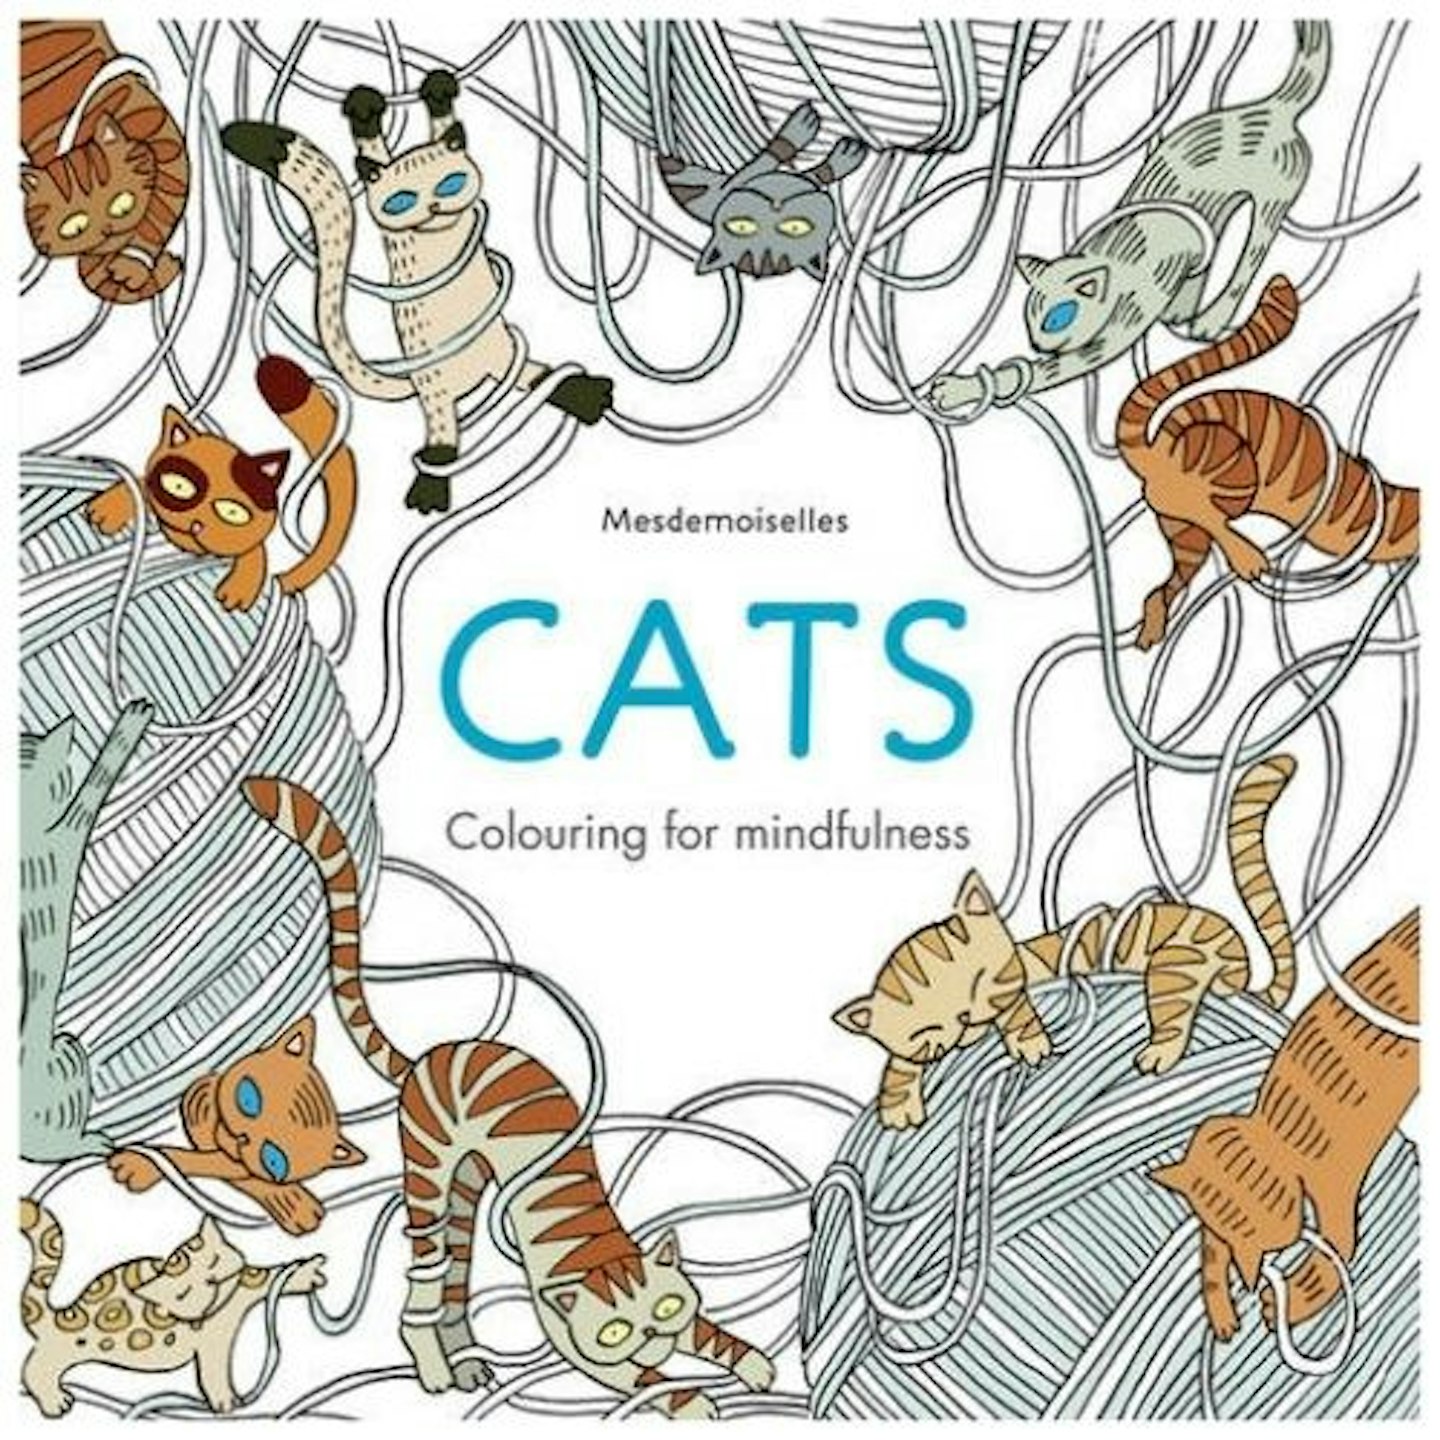 Cats: Colouring for Mindfulness